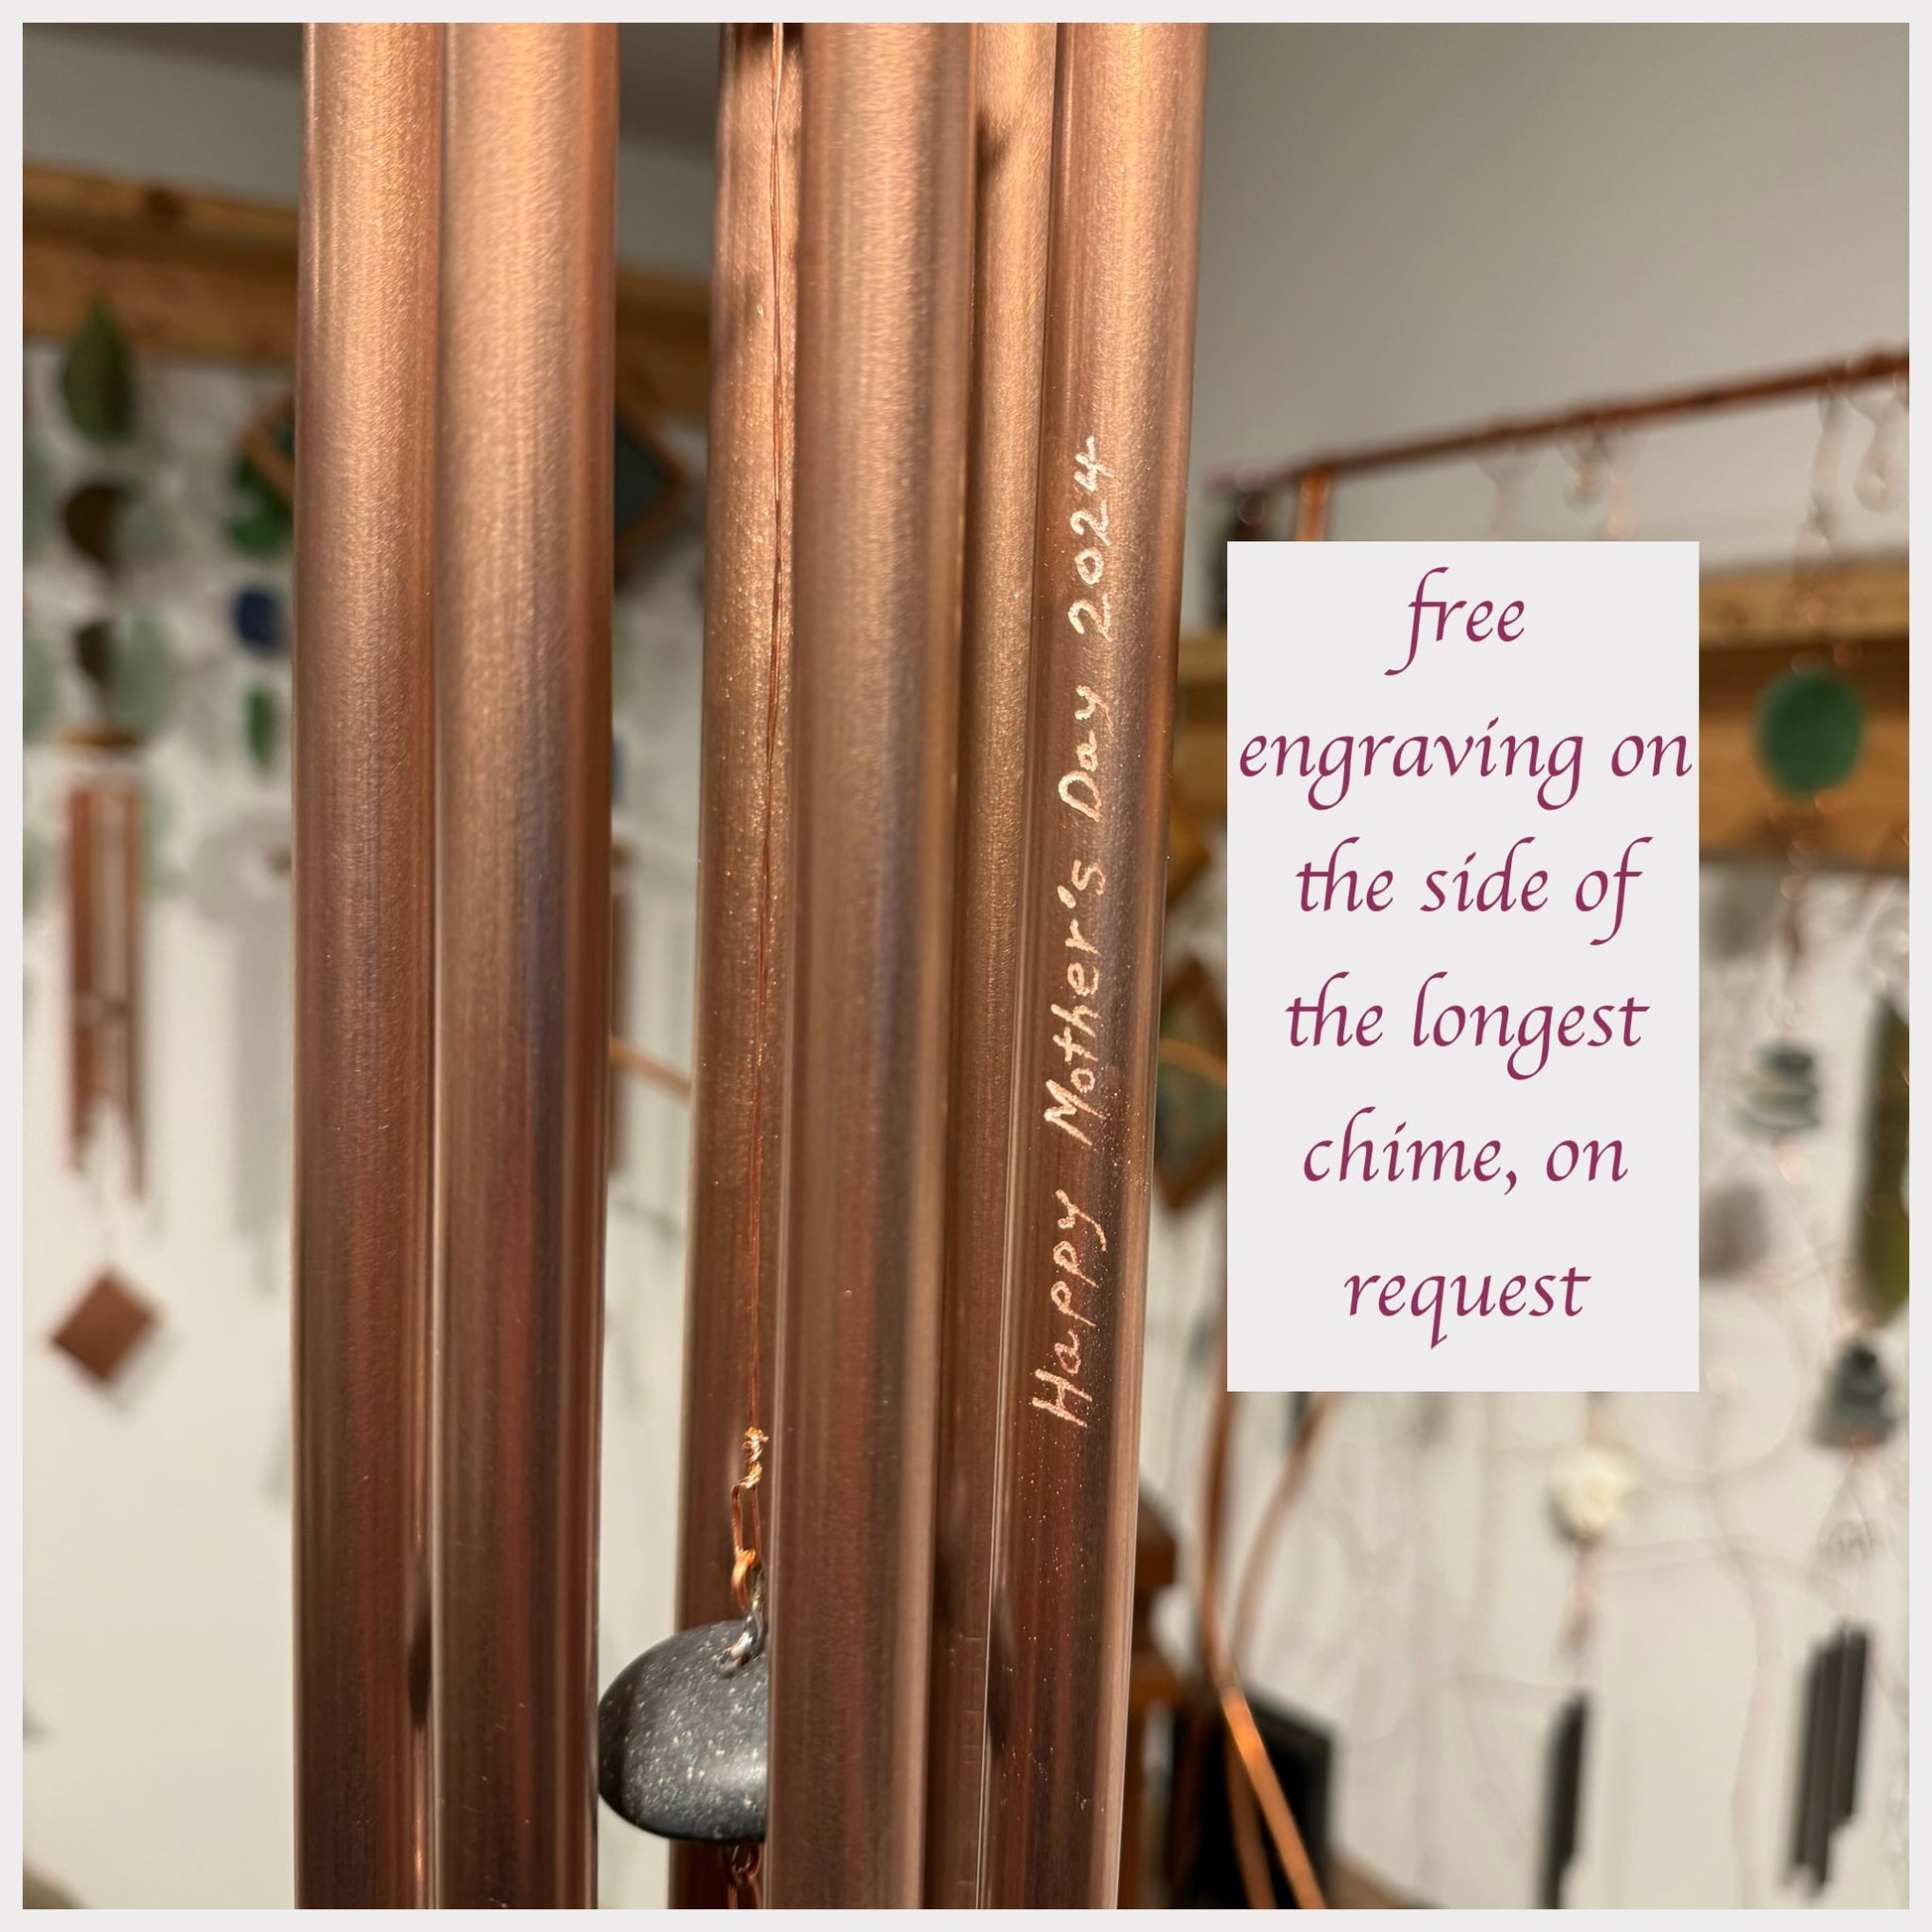 example for free wind chime engraving